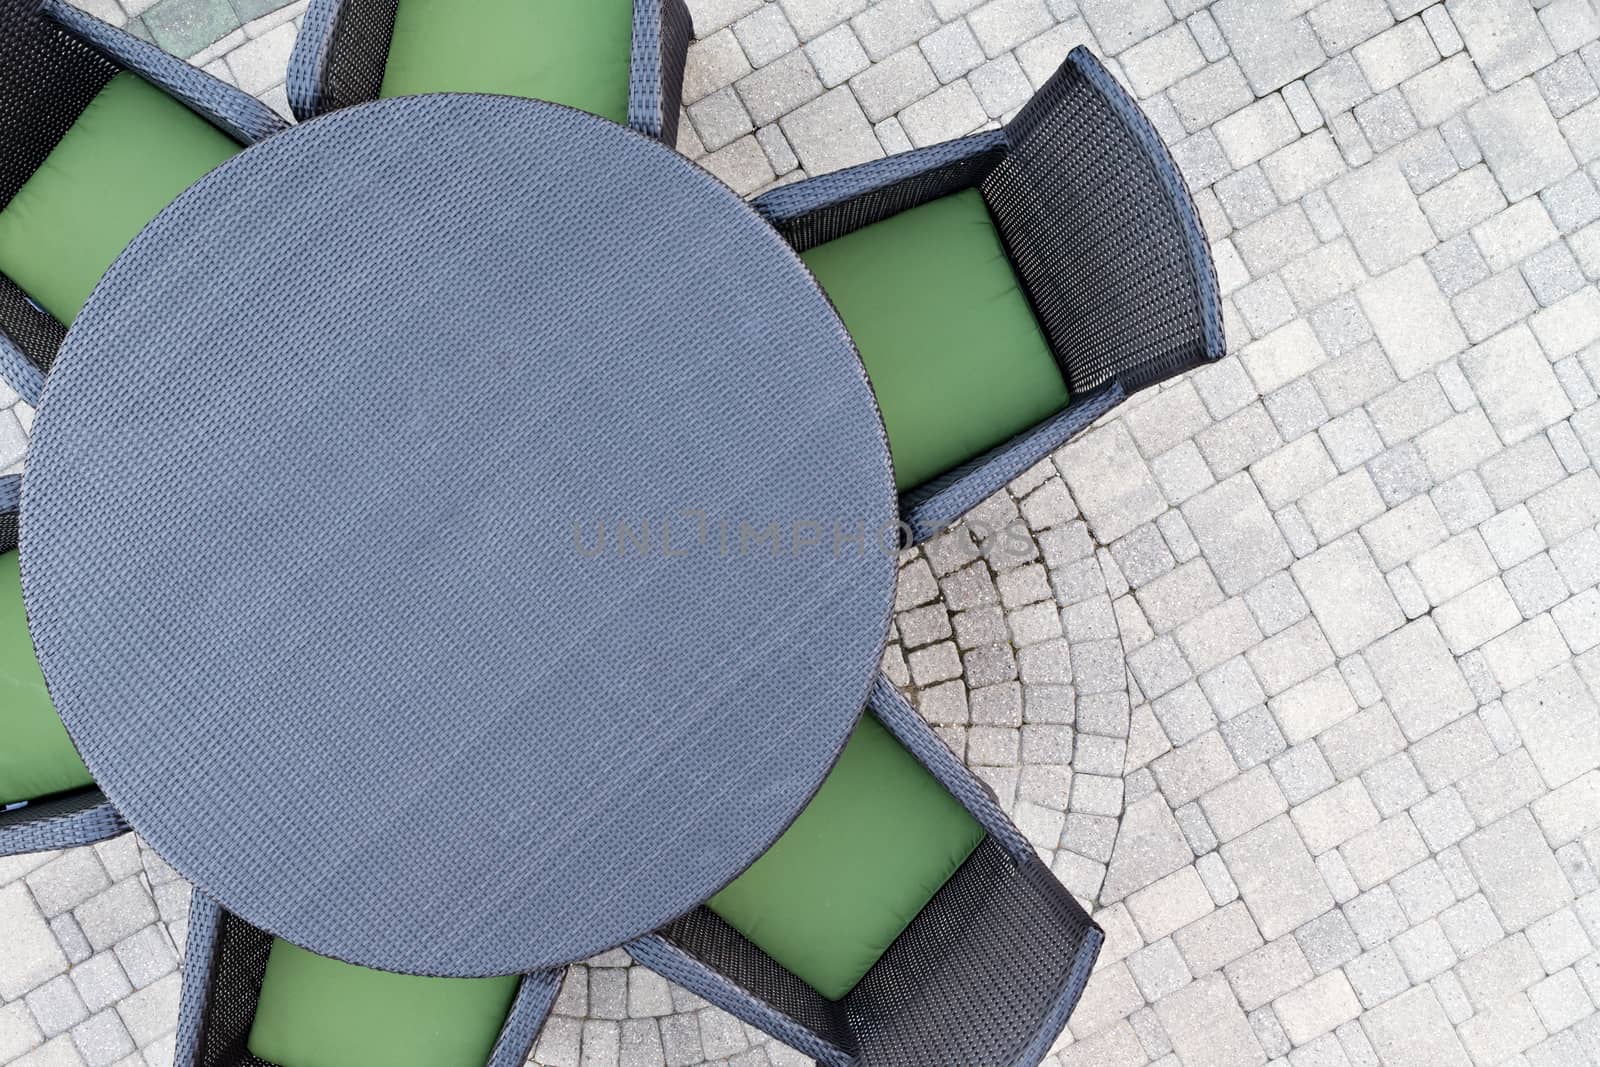 Six seater outdoor patio set with comfortable green cushions and a round dining table on a brick paved open-air patio with copyspace, overhead view